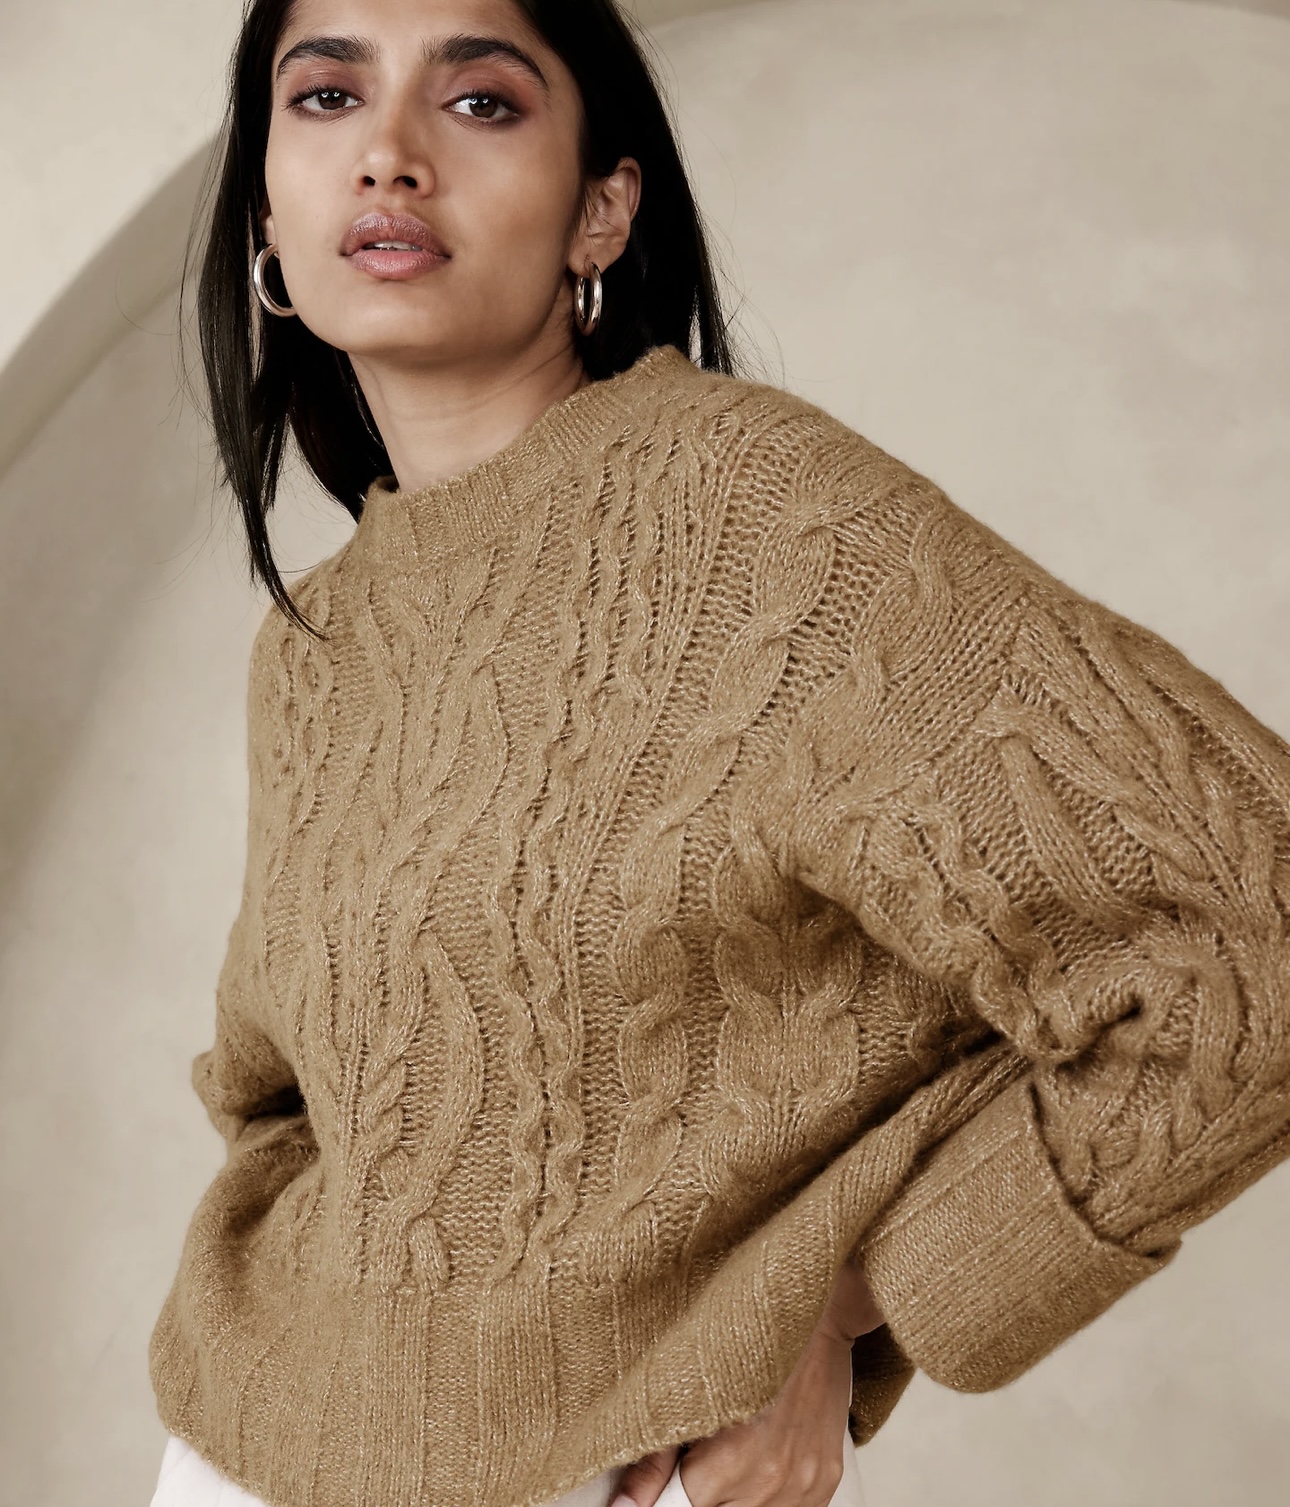 Woman wearing a loose, brown coloured knit sweater